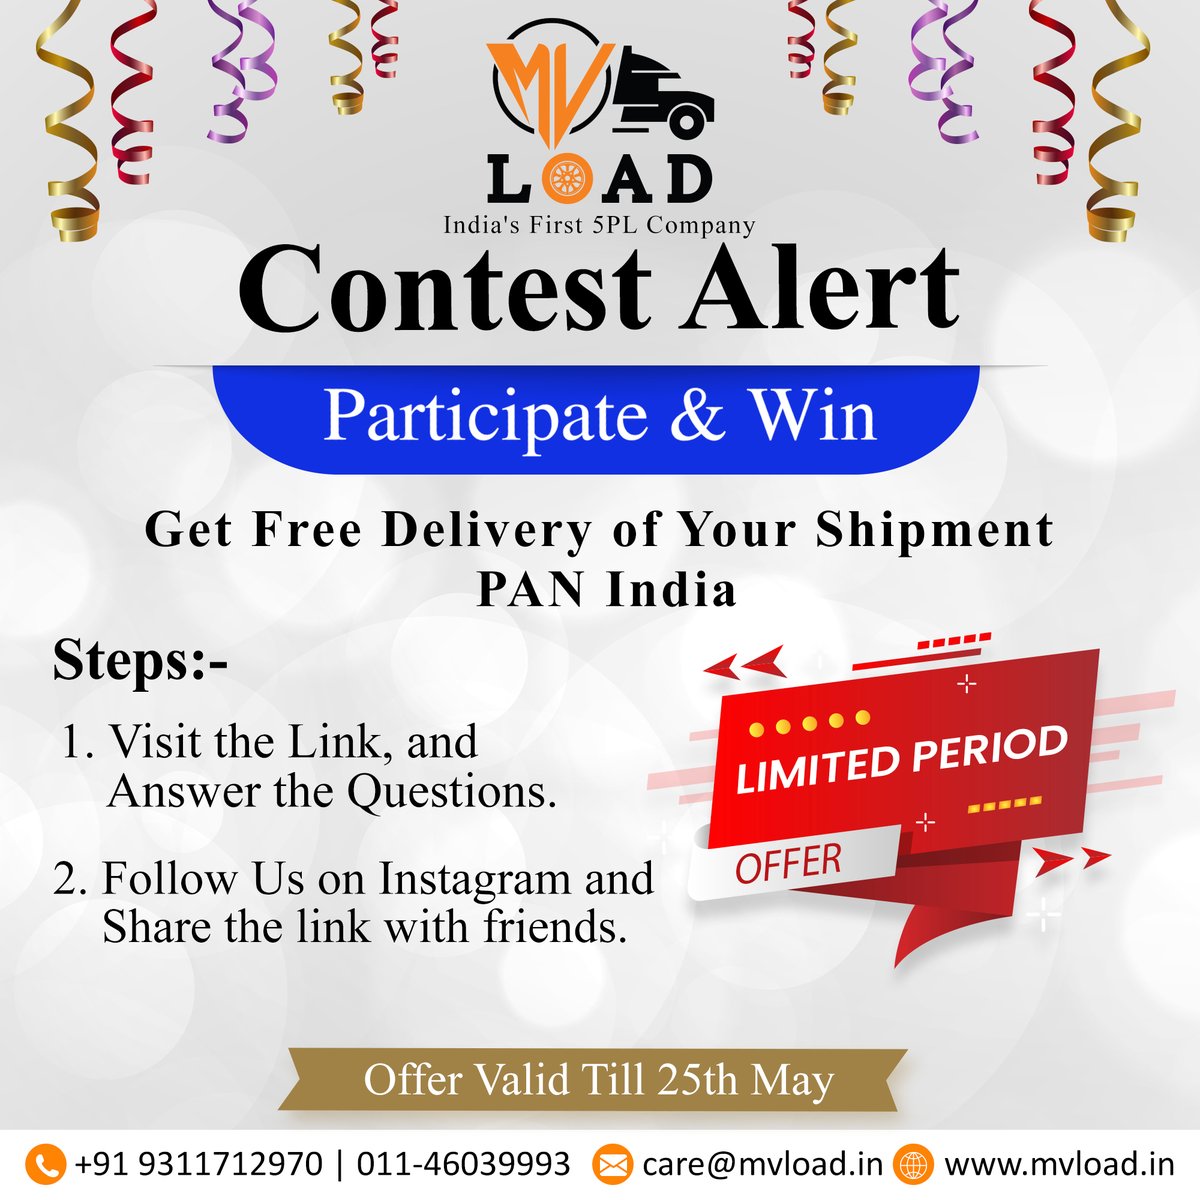 𝐏𝐚𝐫𝐭𝐢𝐜𝐢𝐩𝐚𝐭𝐞 𝐚𝐧𝐝 𝐰𝐢𝐧 Amazing competition! Follow the instructions below to receive free delivery across India!! Here's the referral link: bit.ly/3lfOft4 #contest #offer #win #alert #mvload #earnmoney #logistics #contestindia #delivery #india